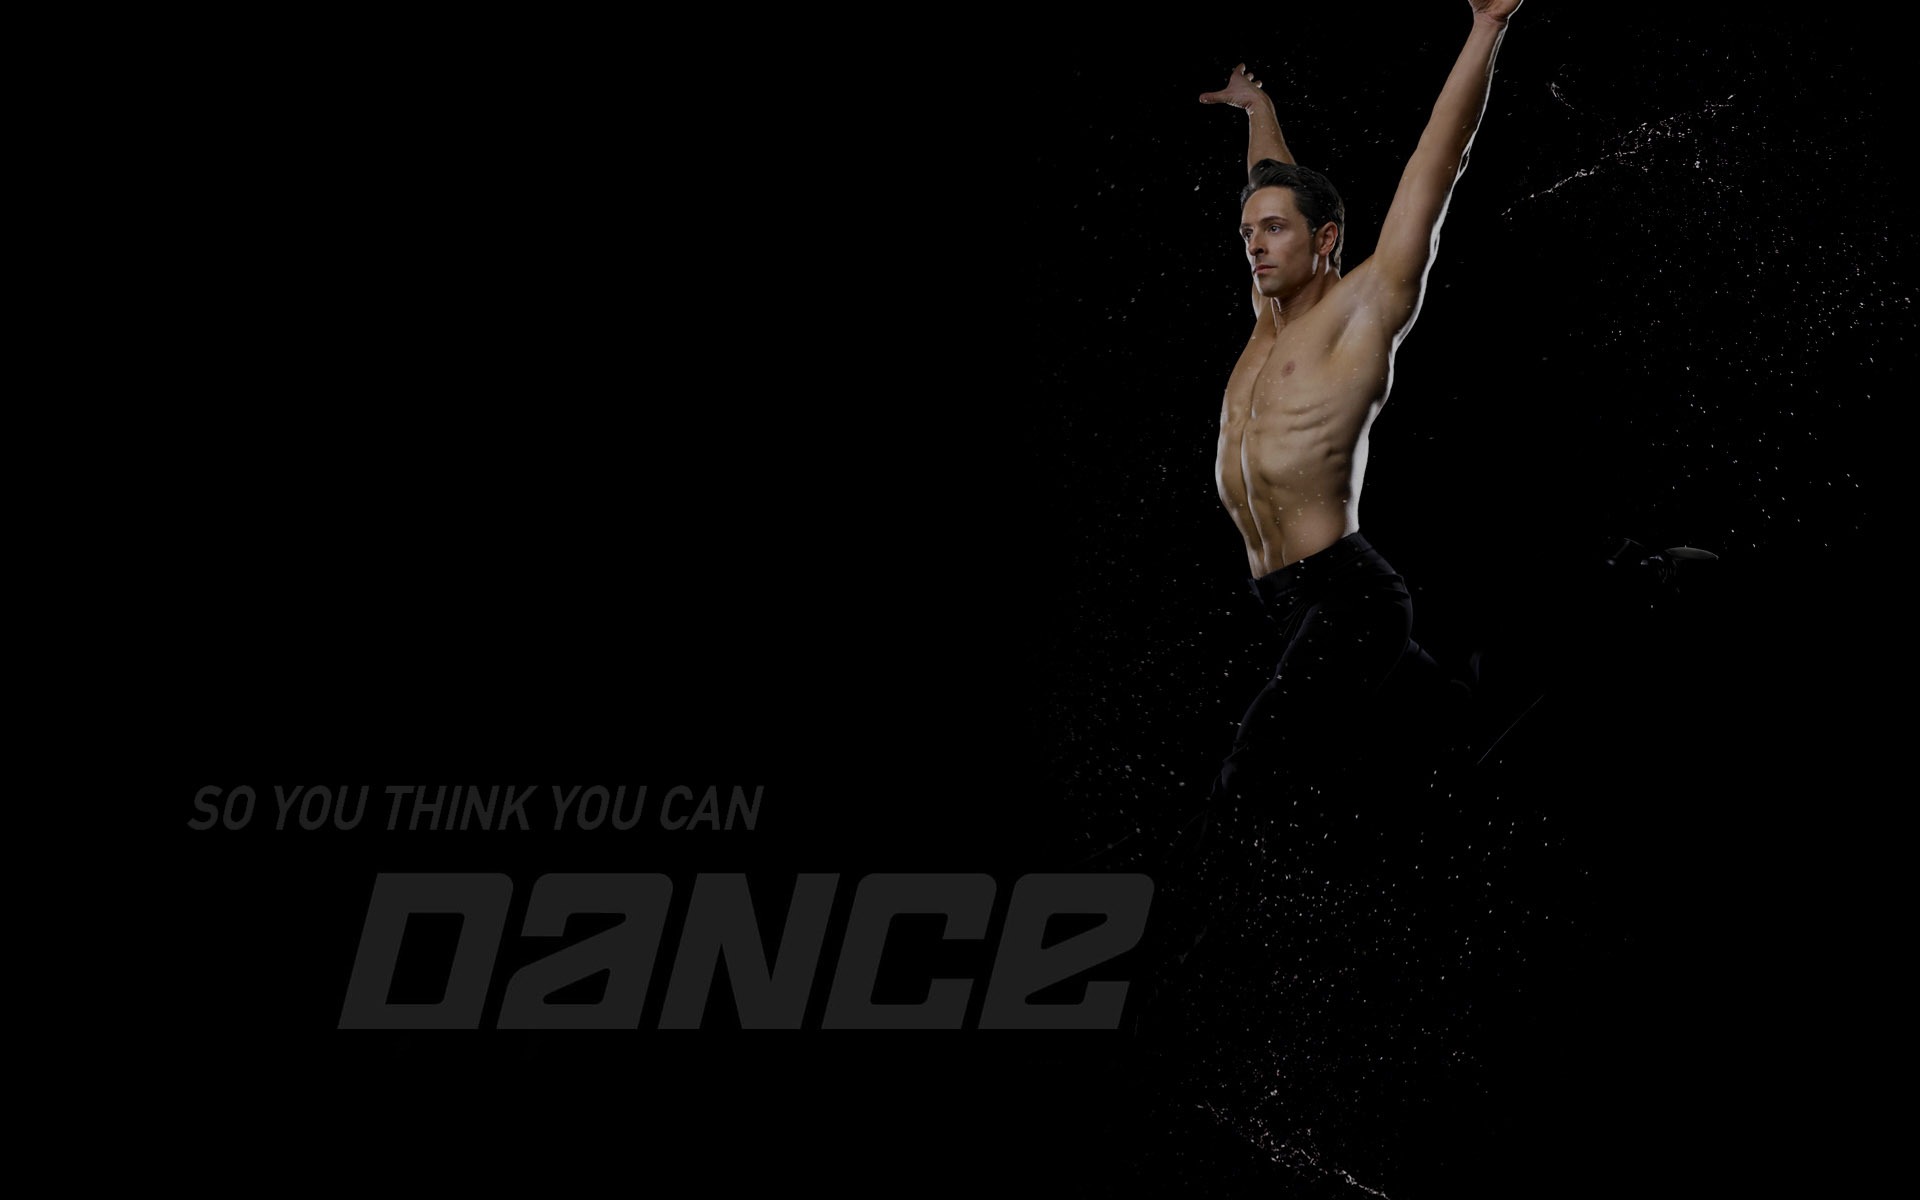 So You Think You Can Dance wallpaper (2) #10 - 1920x1200